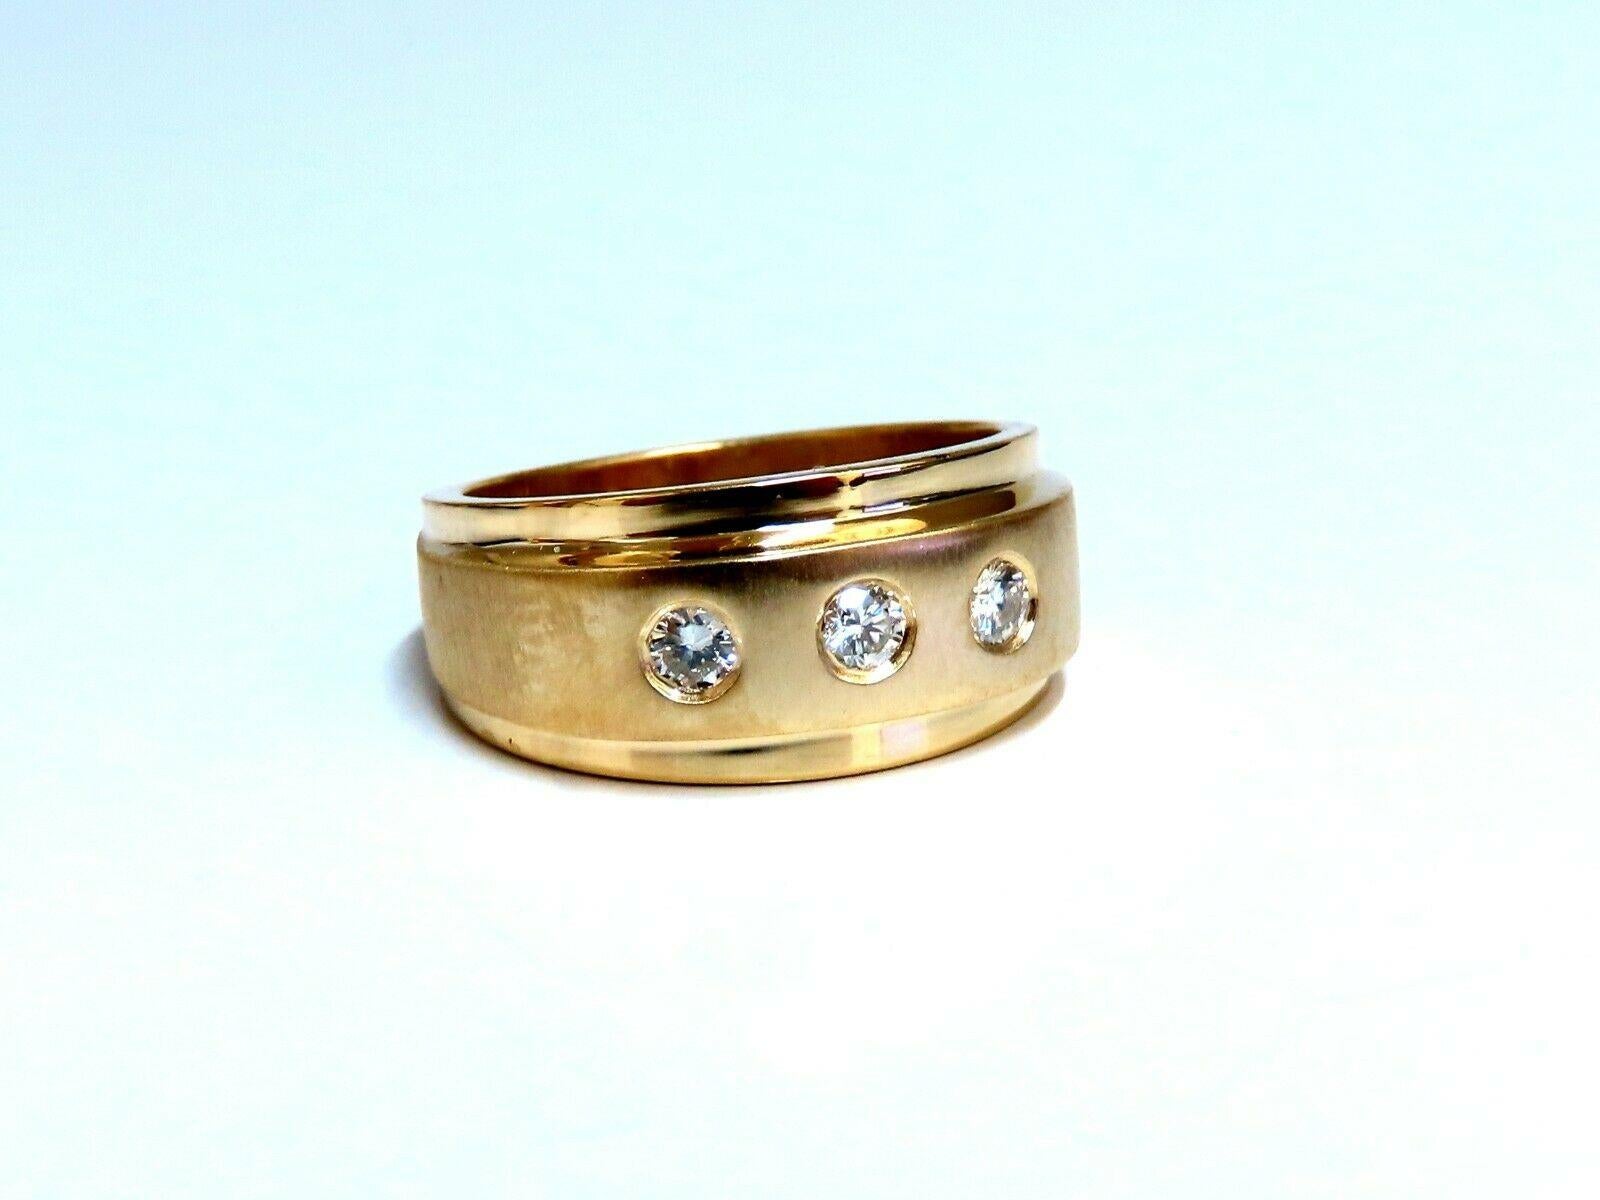 Minimalist Masculine Femme Statement

.26ct. Natural diamonds ring

H-color Vs-2 clarity 

Very good Cuts / Full cut Brilliants

14kt yellow gold

7.5 Grams

Ring size: 6

(Complimentary resizing available)

Ring is 12.7mm wide

8.8mm depth.